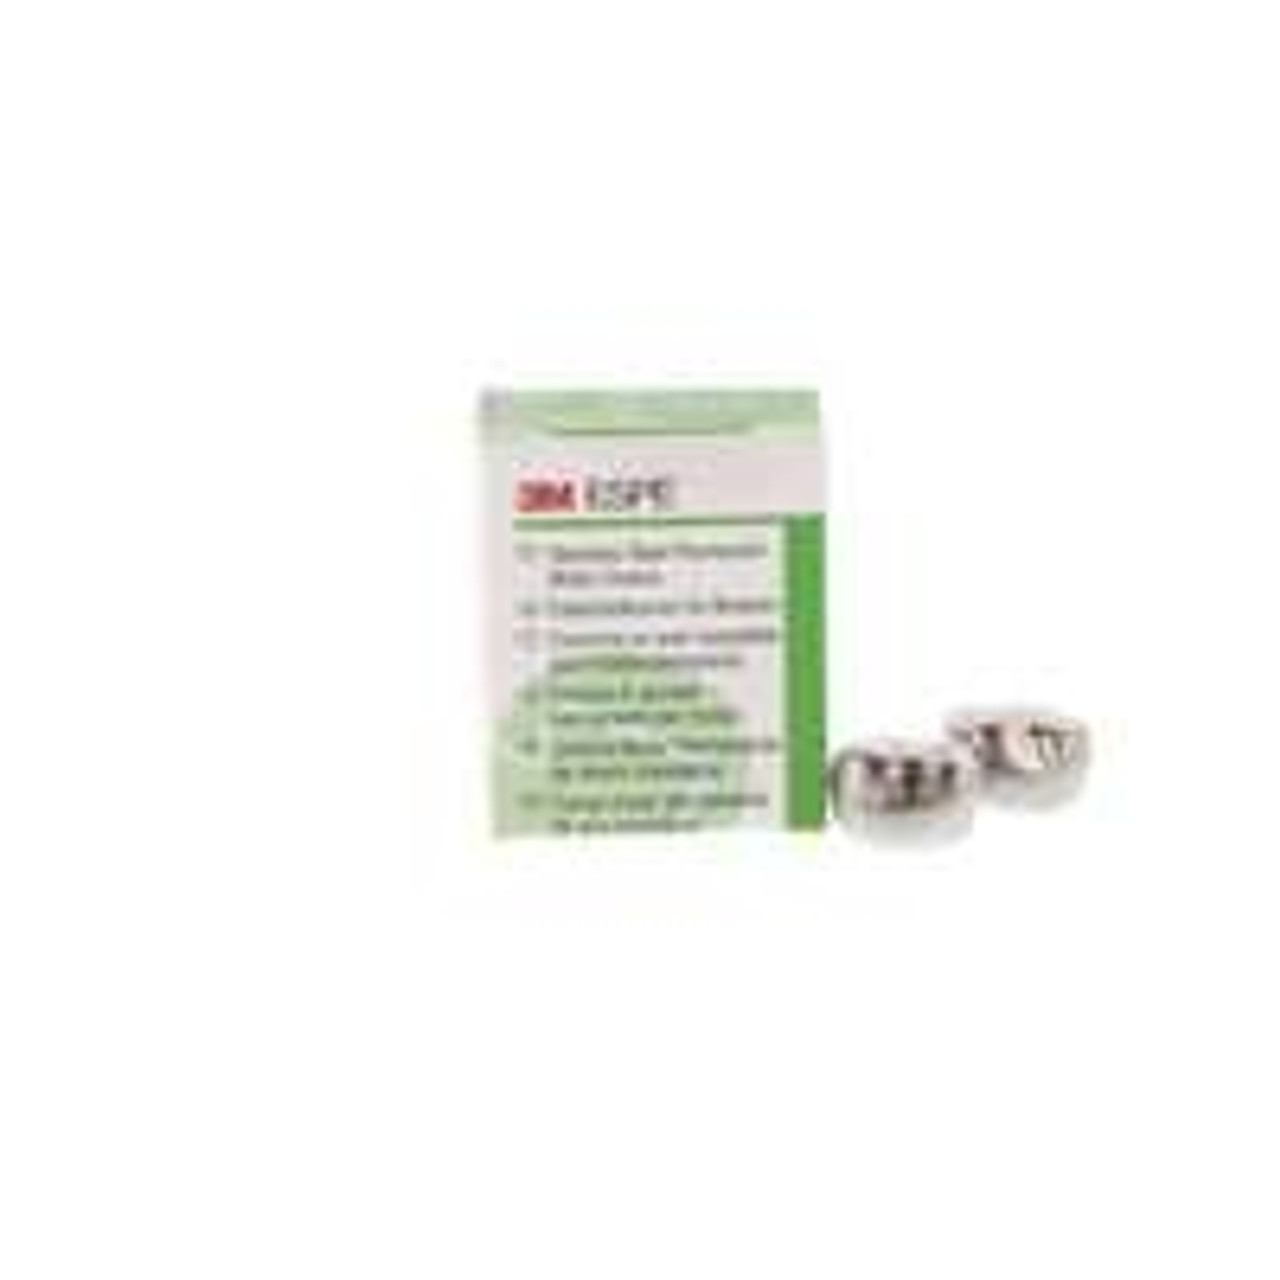 3M ORAL CARE STAINLESS STEEL CROWNS, 6LL7